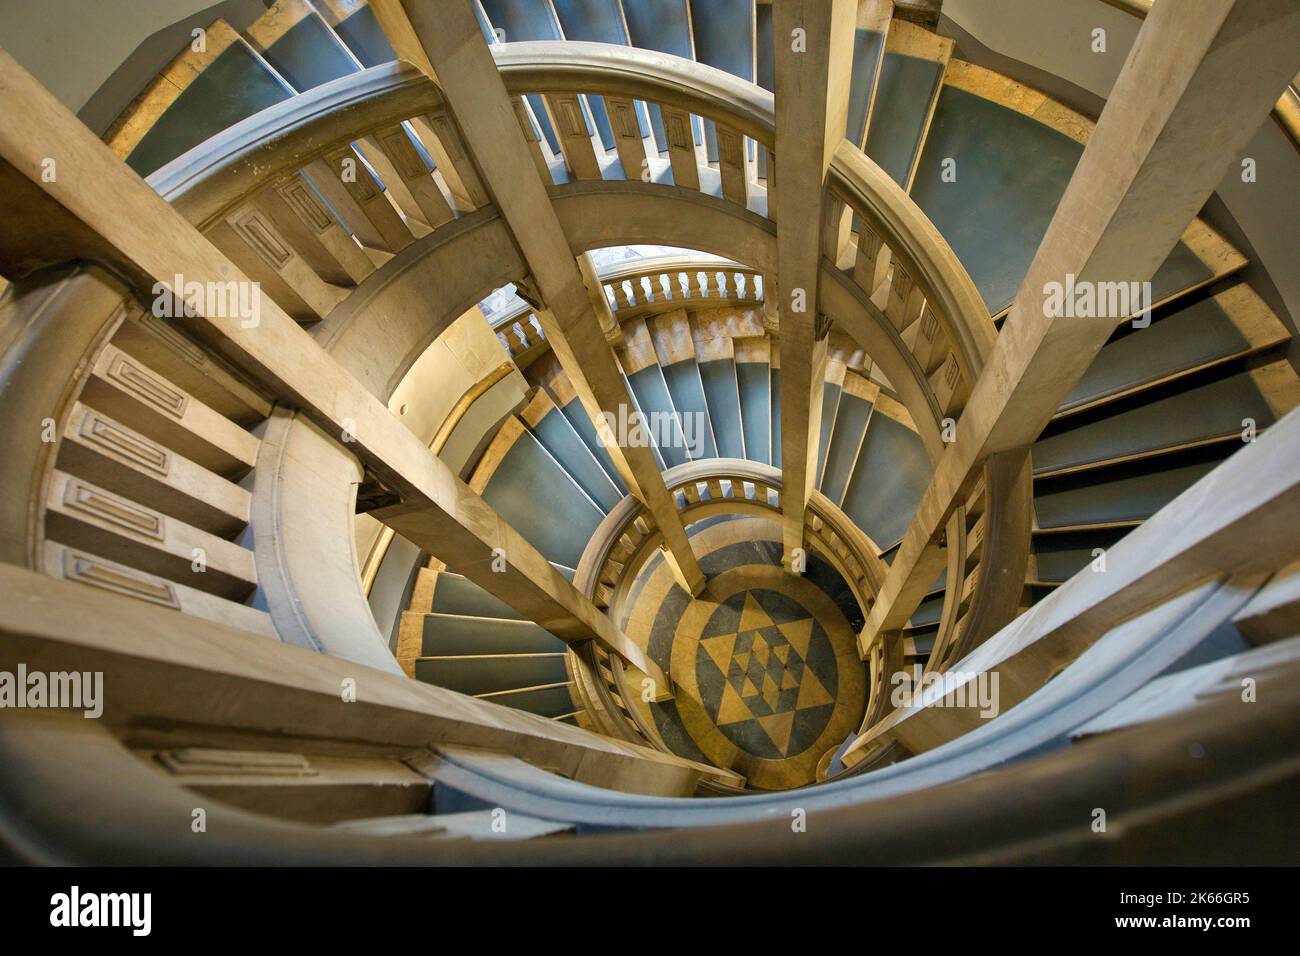 New Town Hall, interior view with spiral staircase, Germany, Lower Saxony, Hanover Stock Photo